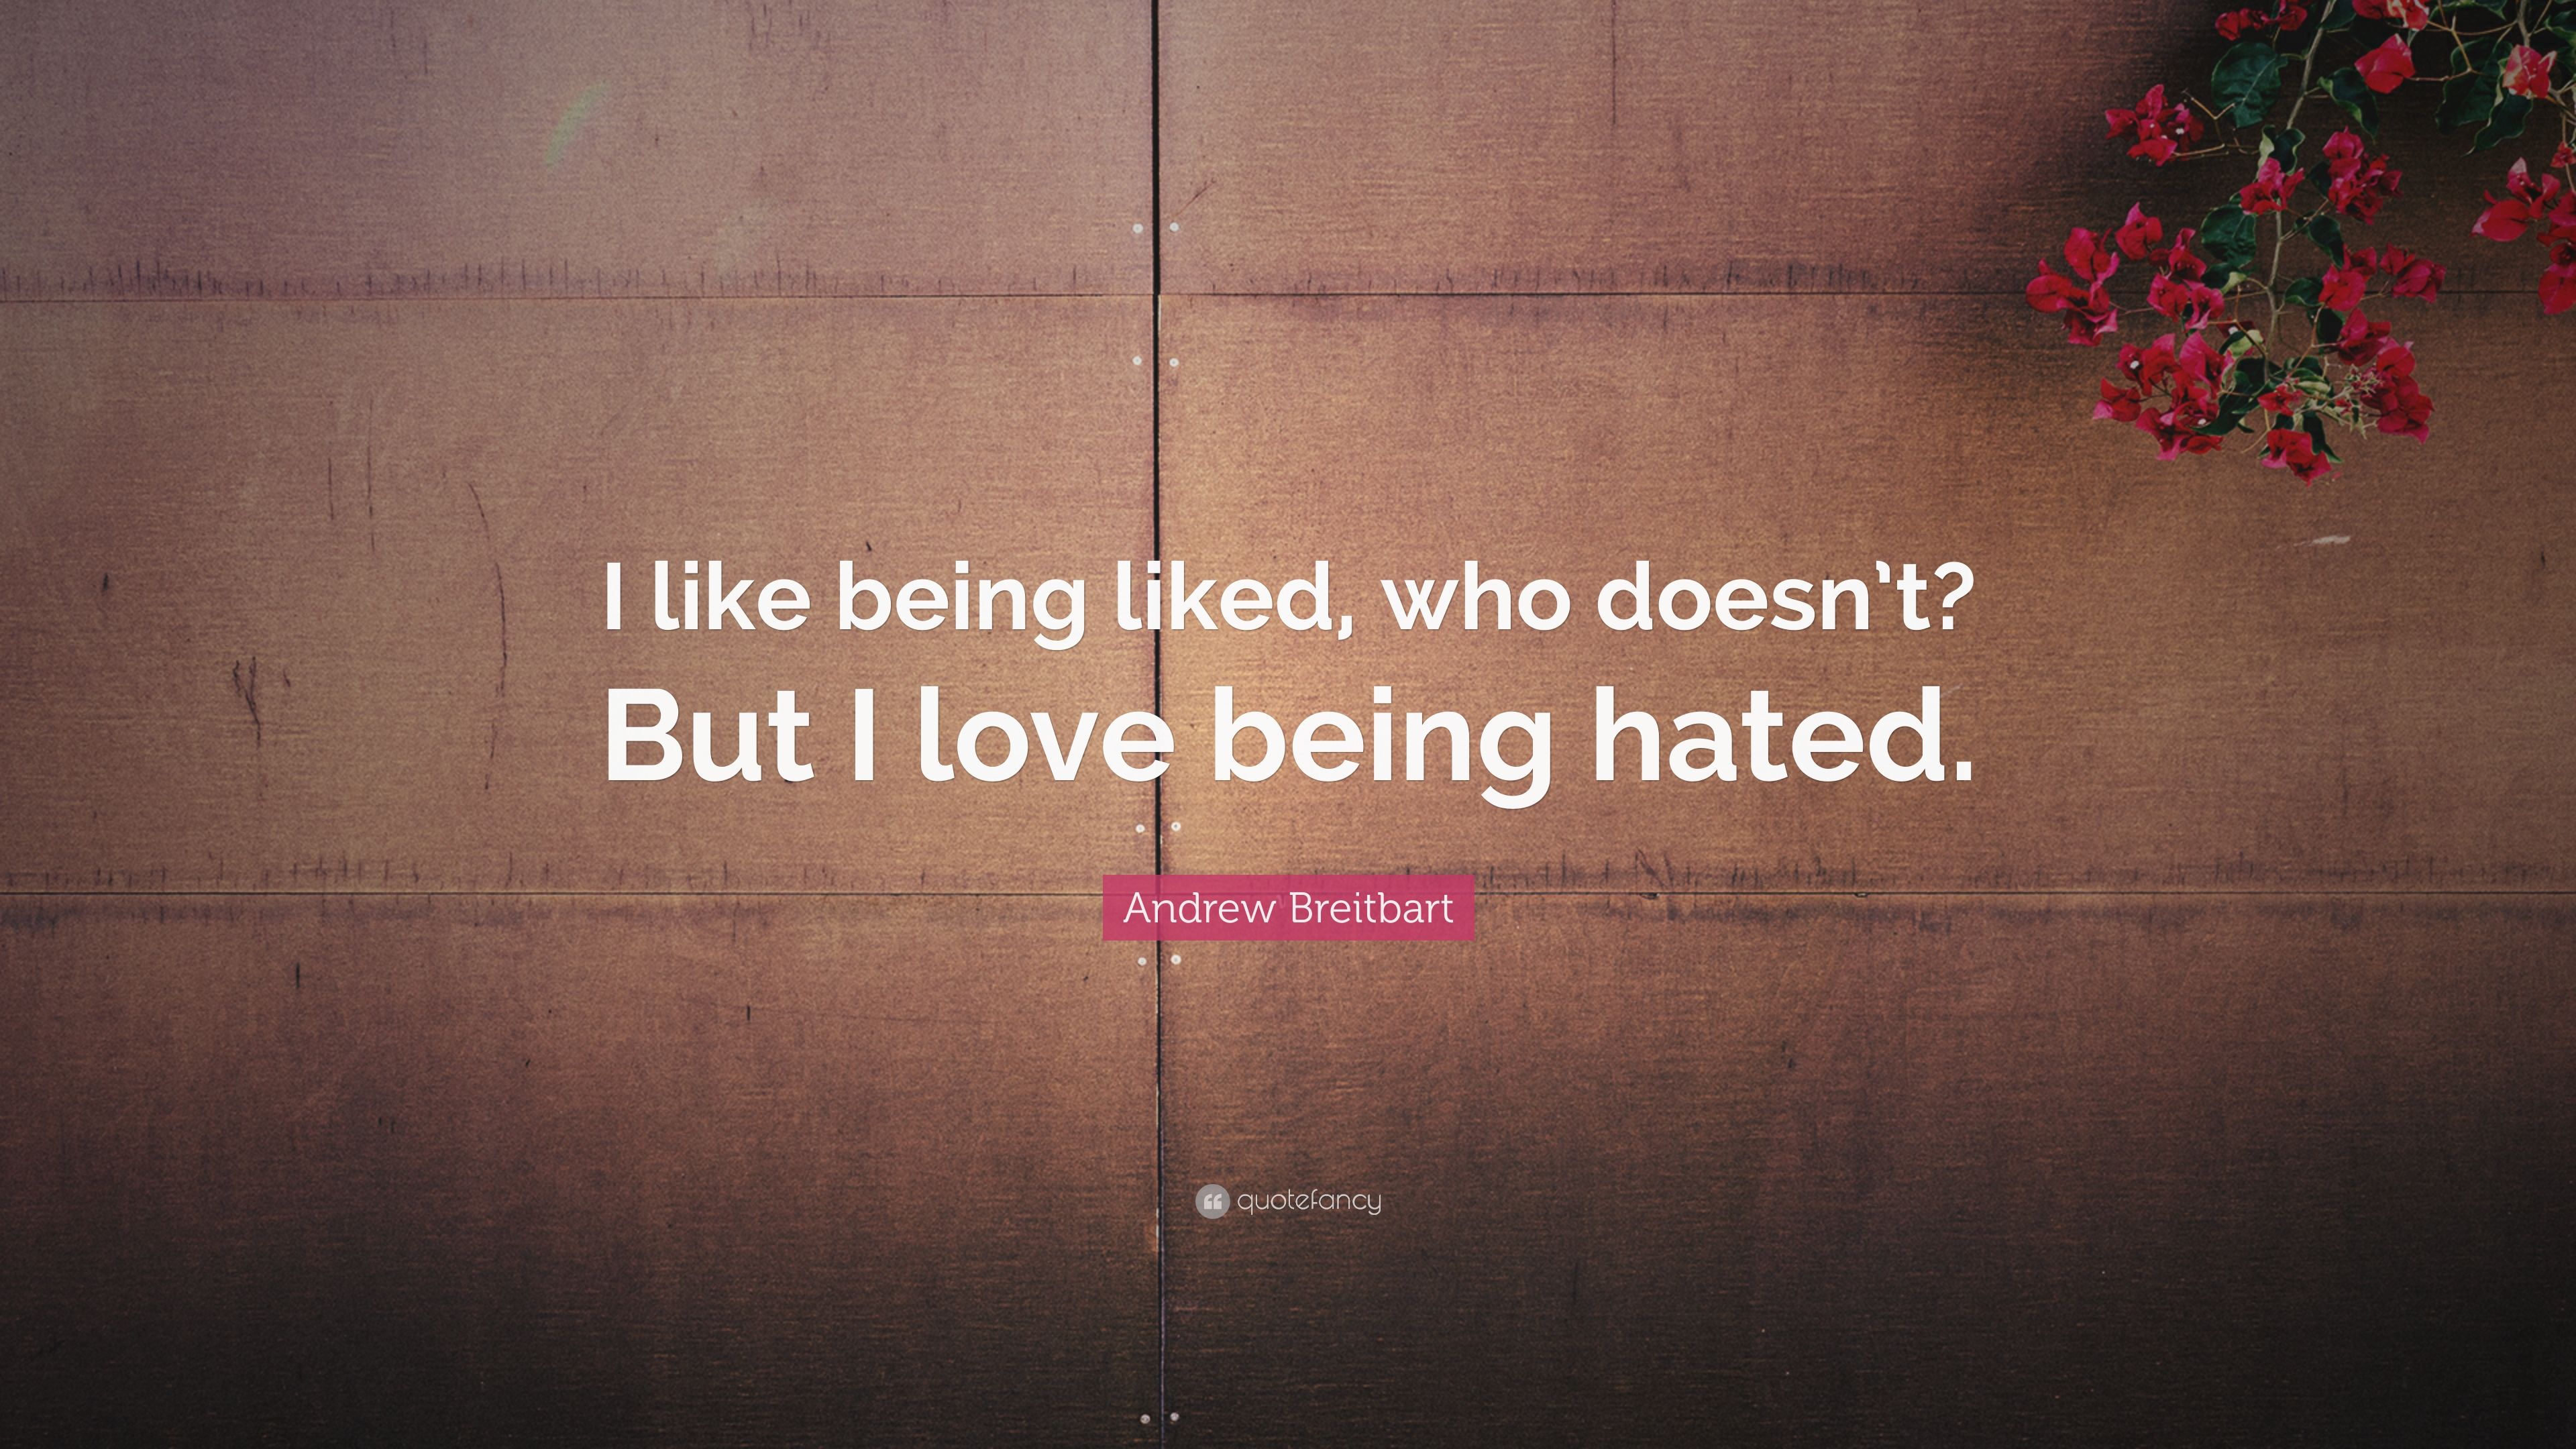 Andrew Breitbart Quote: “I like being liked, who doesn't? But I